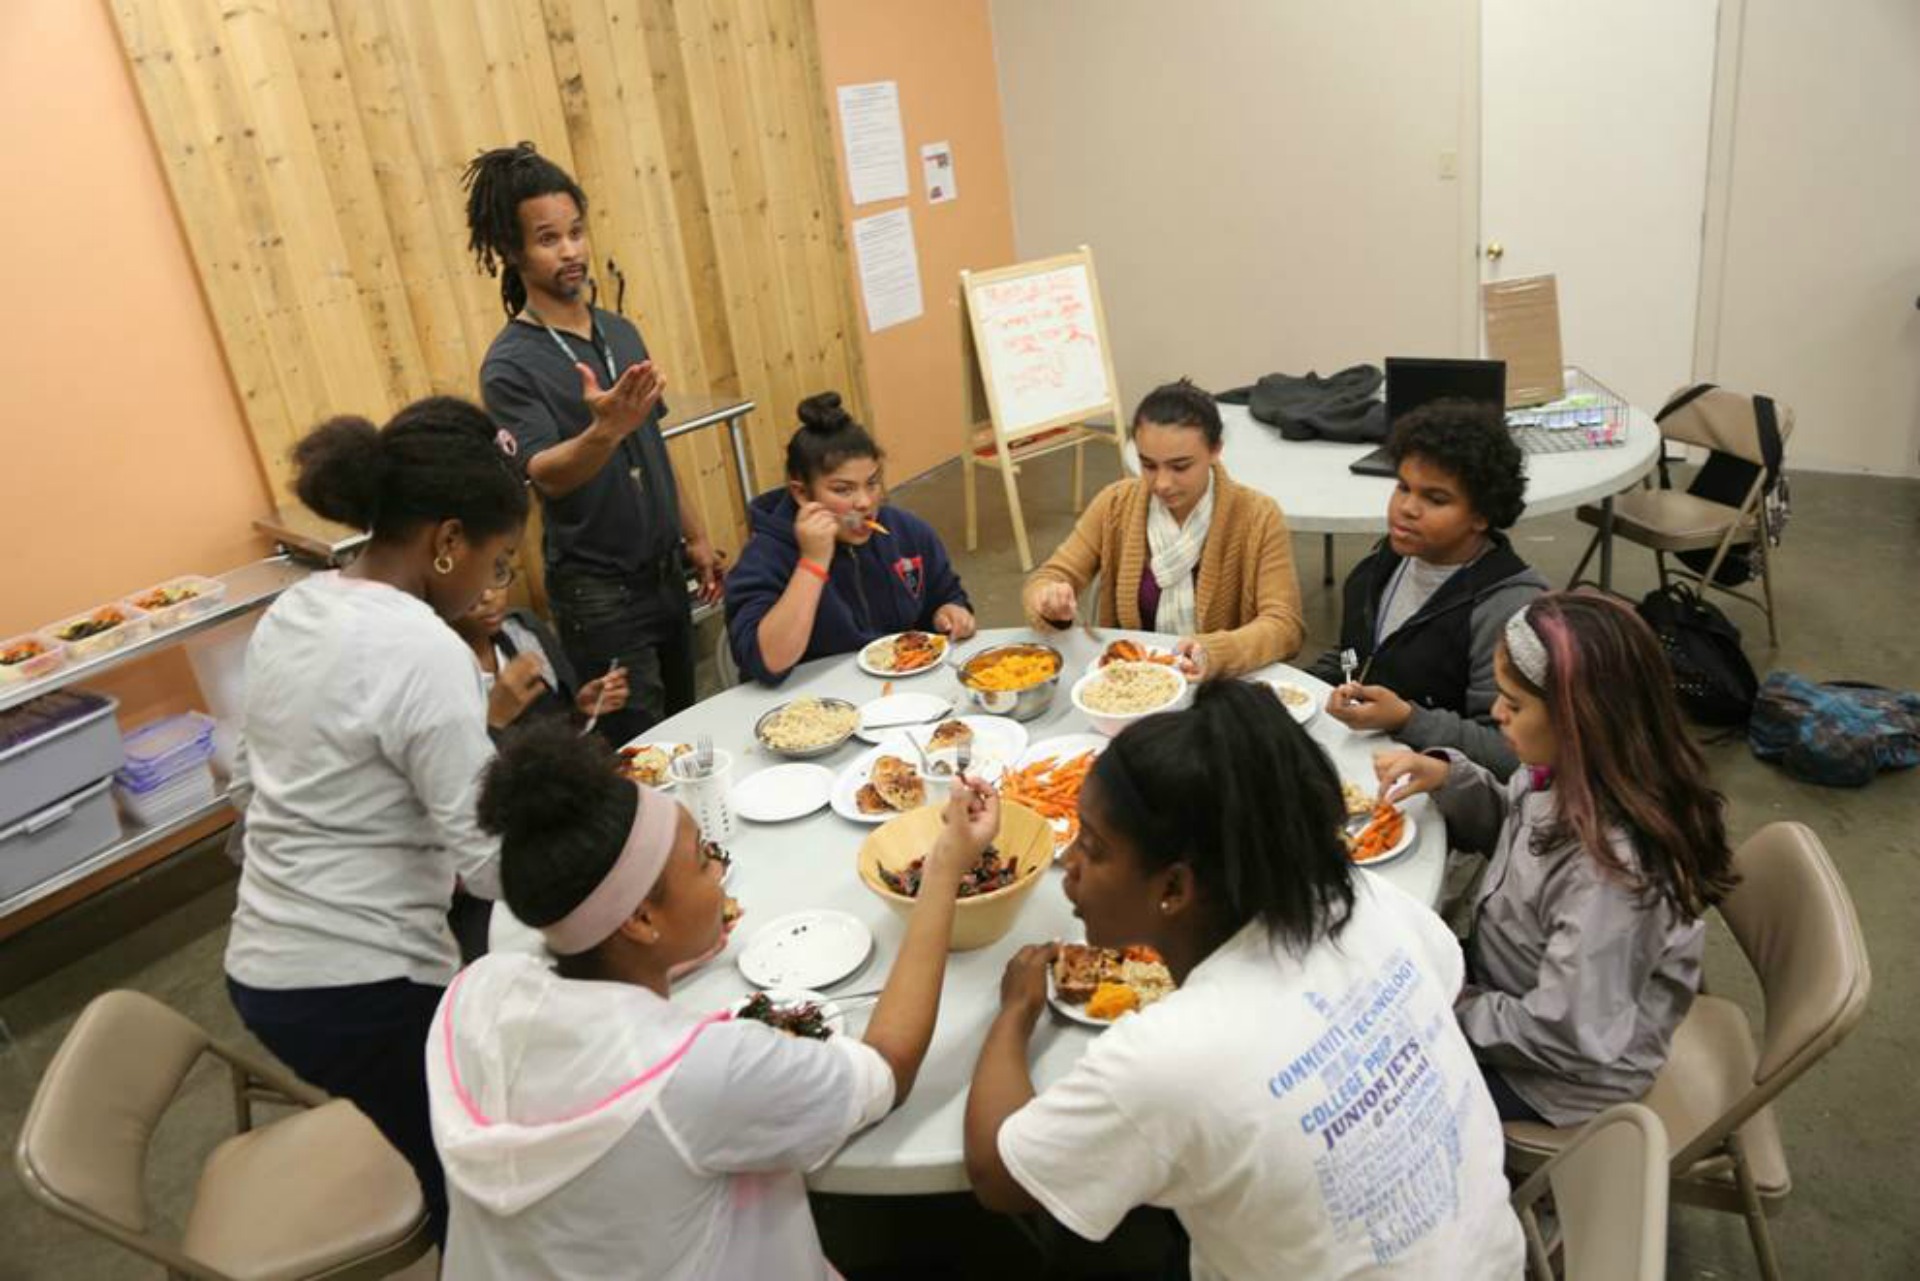 Teen volunteers eating together after cooking for the Clinic.